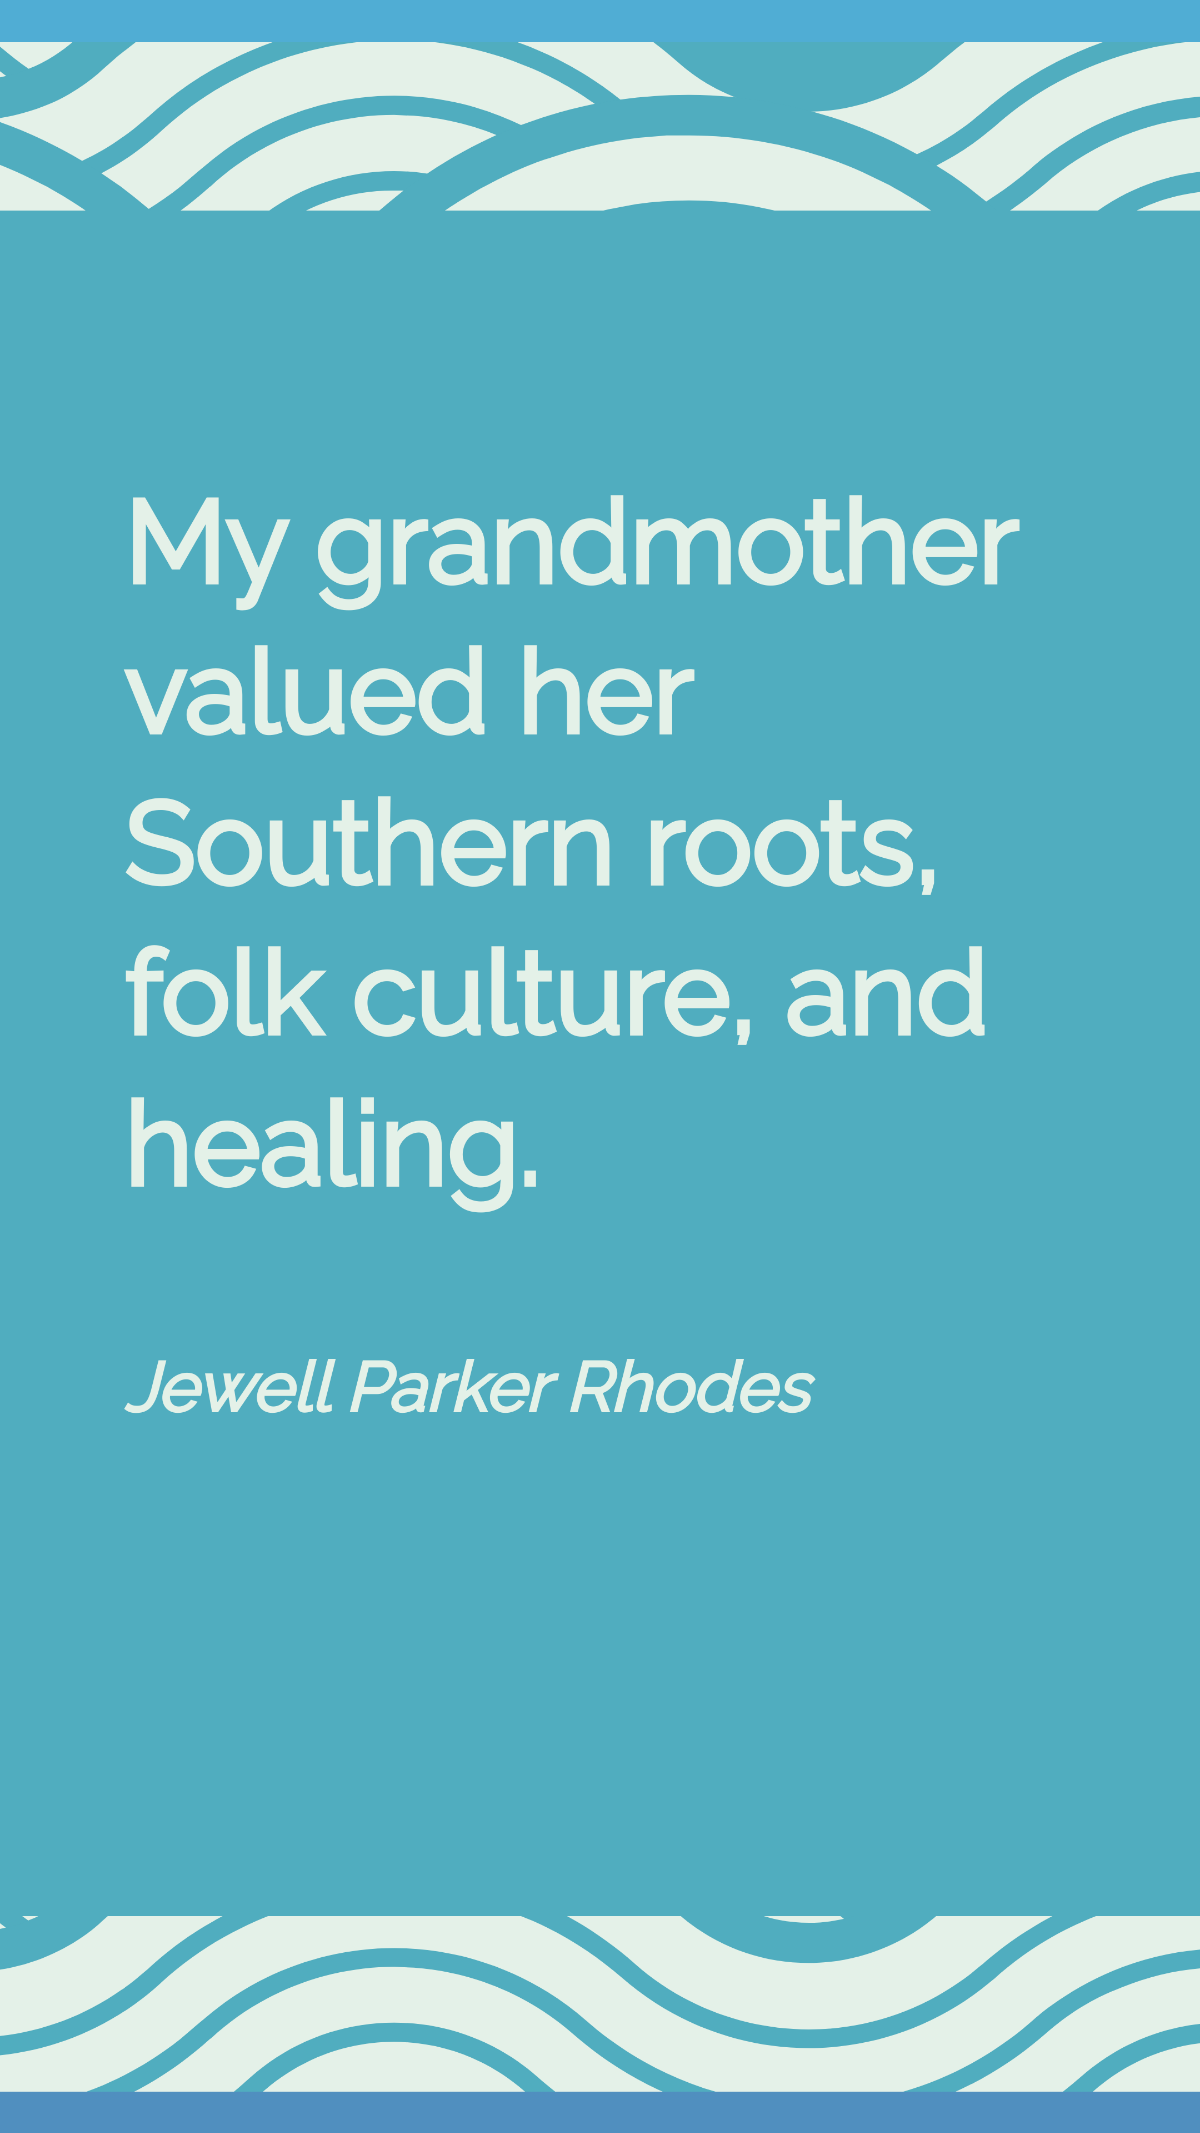 Free Jewell Parker Rhodes - My grandmother valued her Southern roots, folk culture, and healing. Template